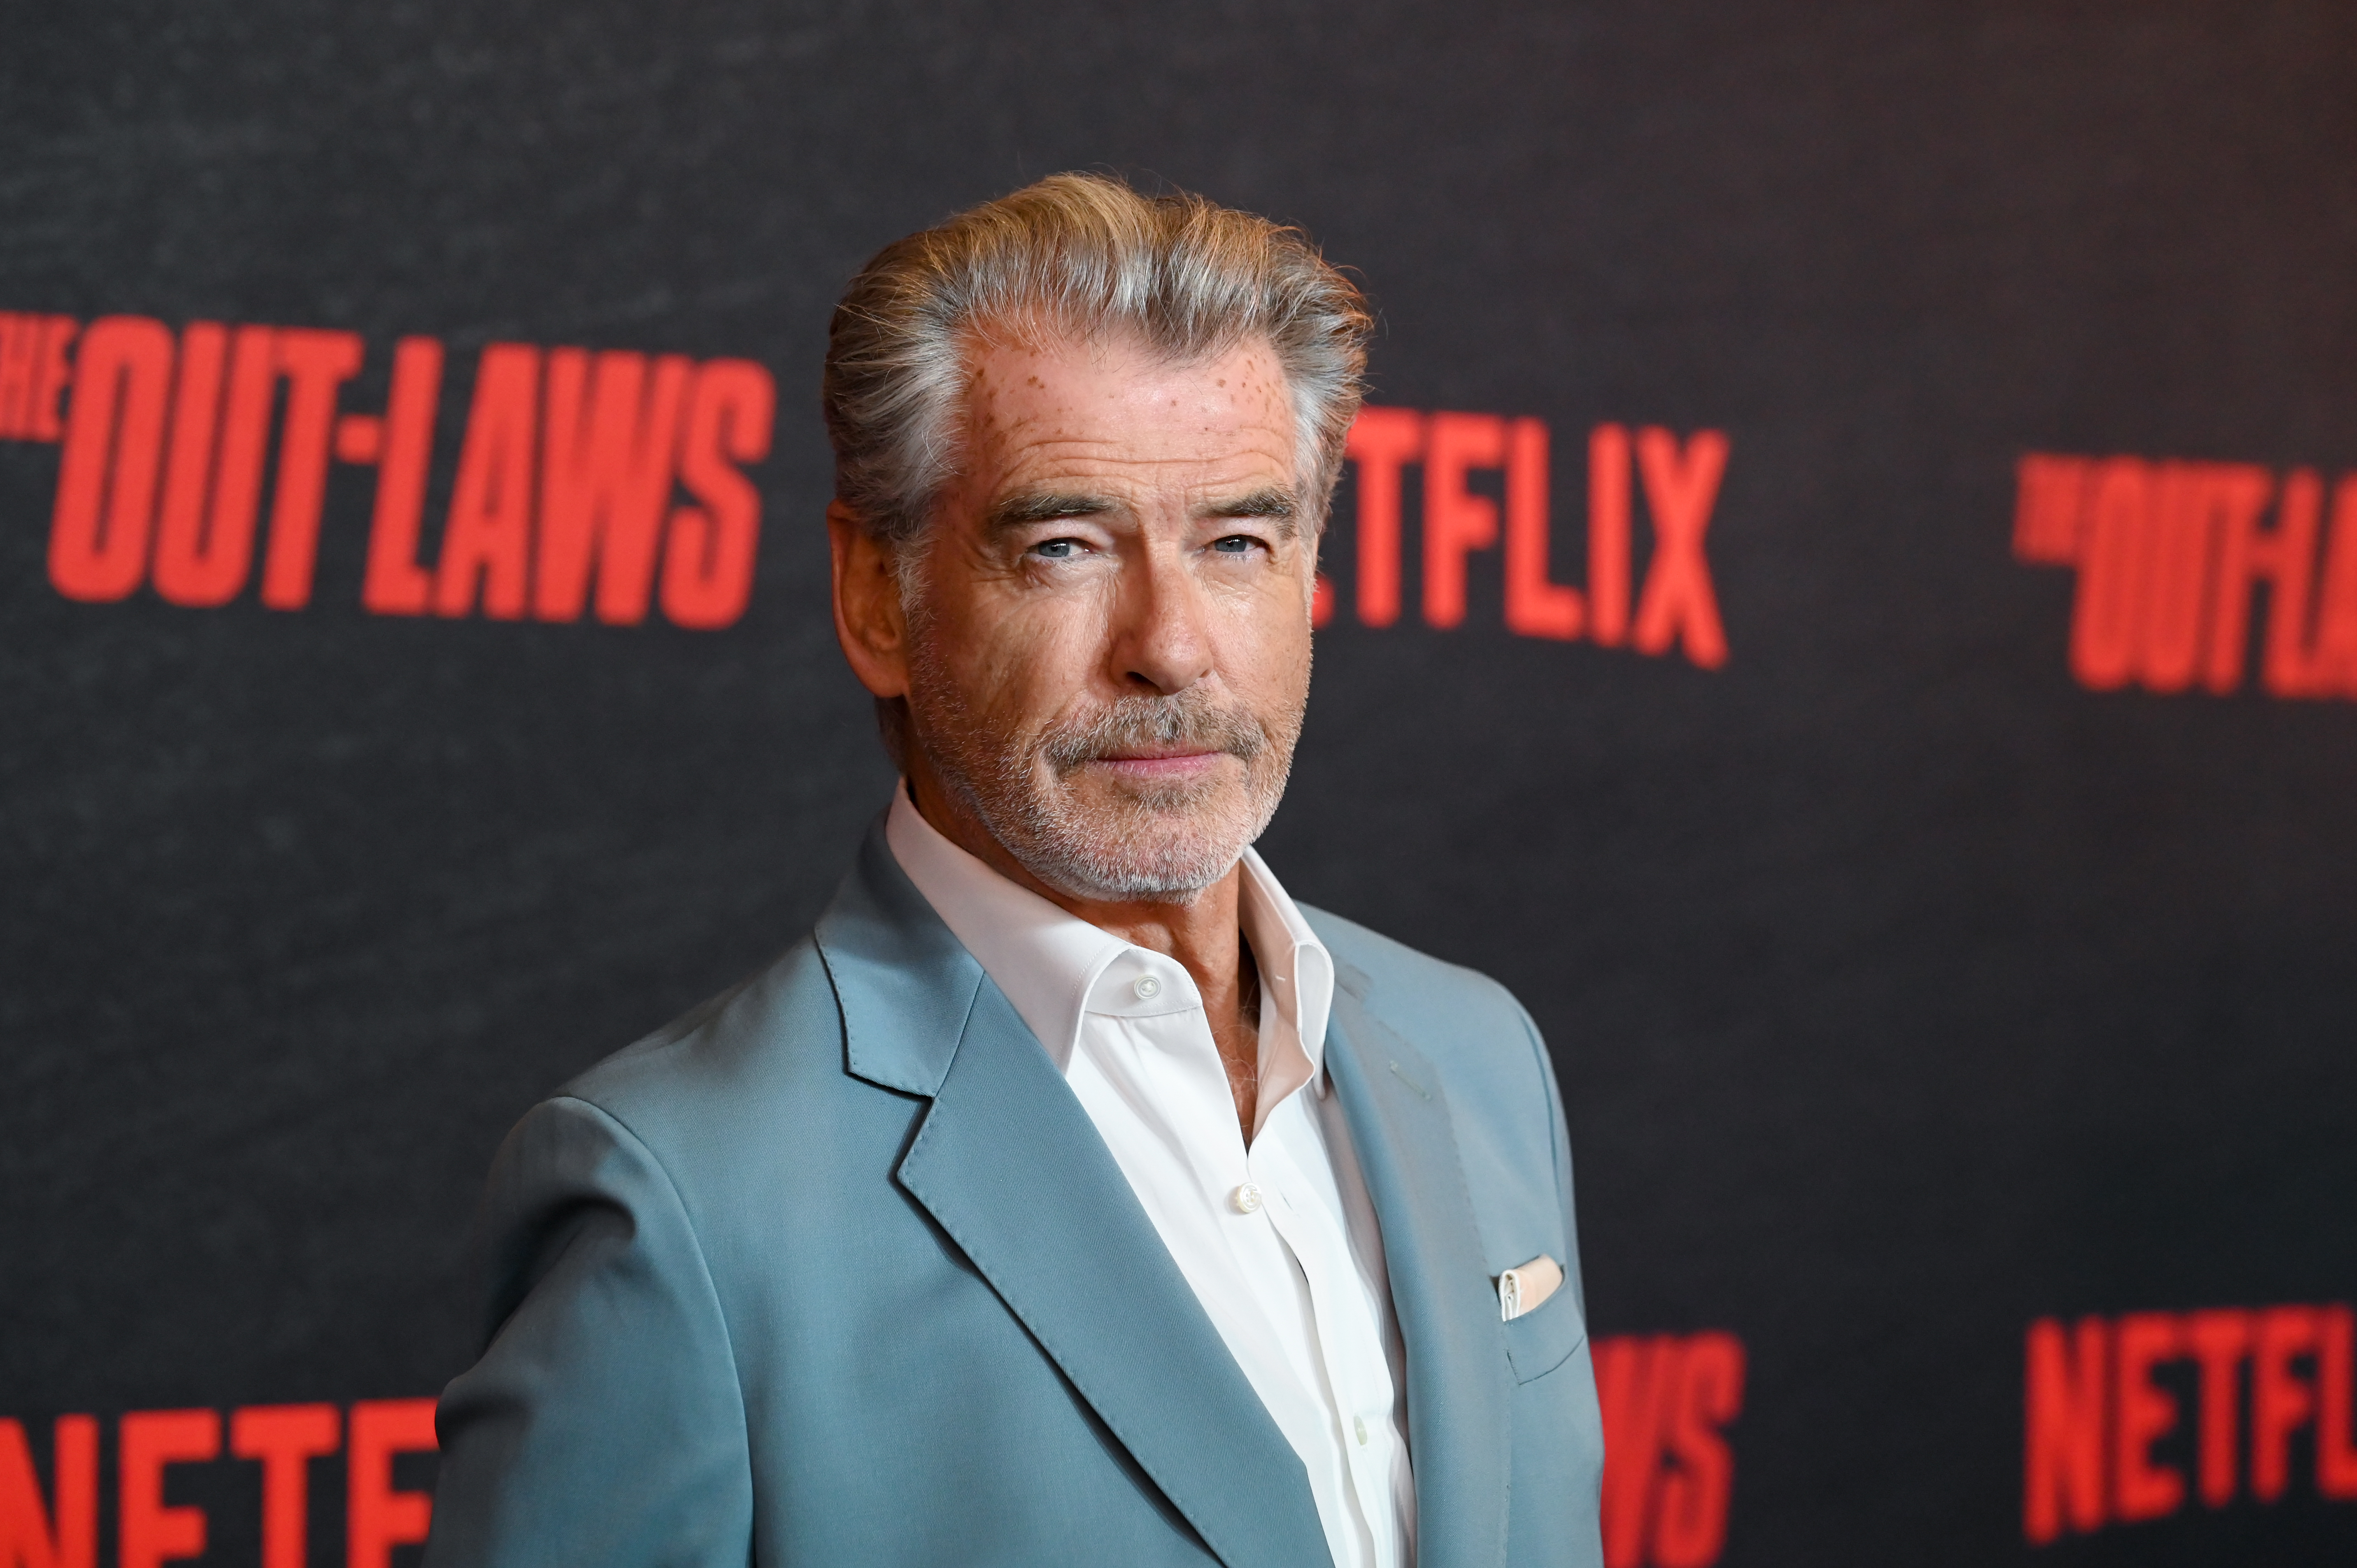 Pierce Brosnan at the premiere of "The Out-Laws" in California in 2023 | Source: Getty Images